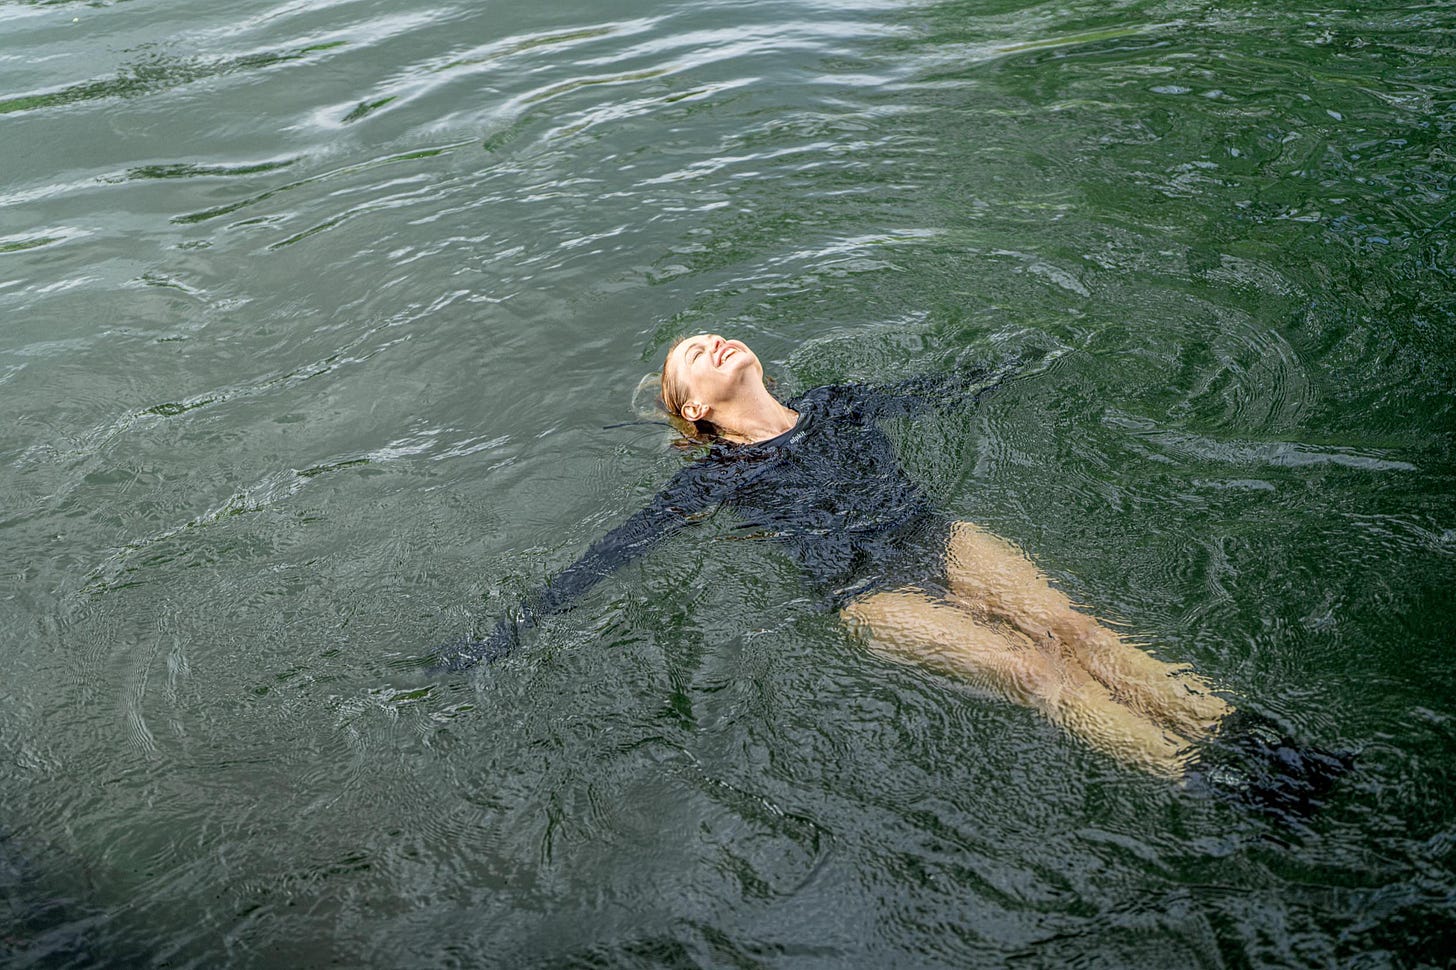 Jane swimming in a river